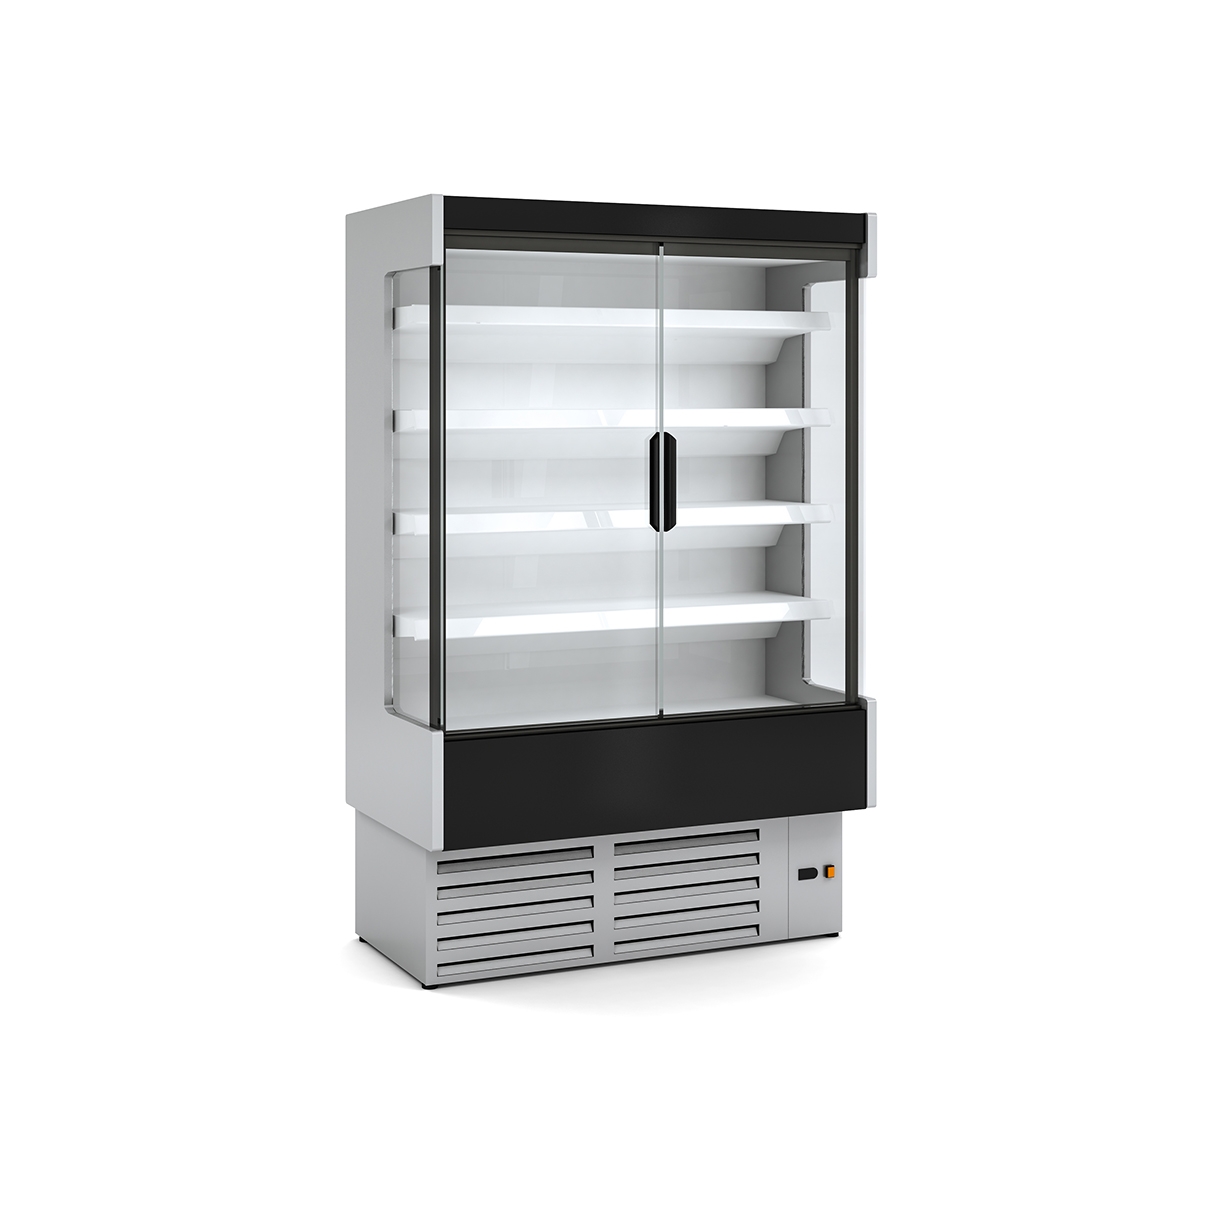 REFRIGERATED WALL-MOUNTED DISPLAY CABINET DG0 M1-M2